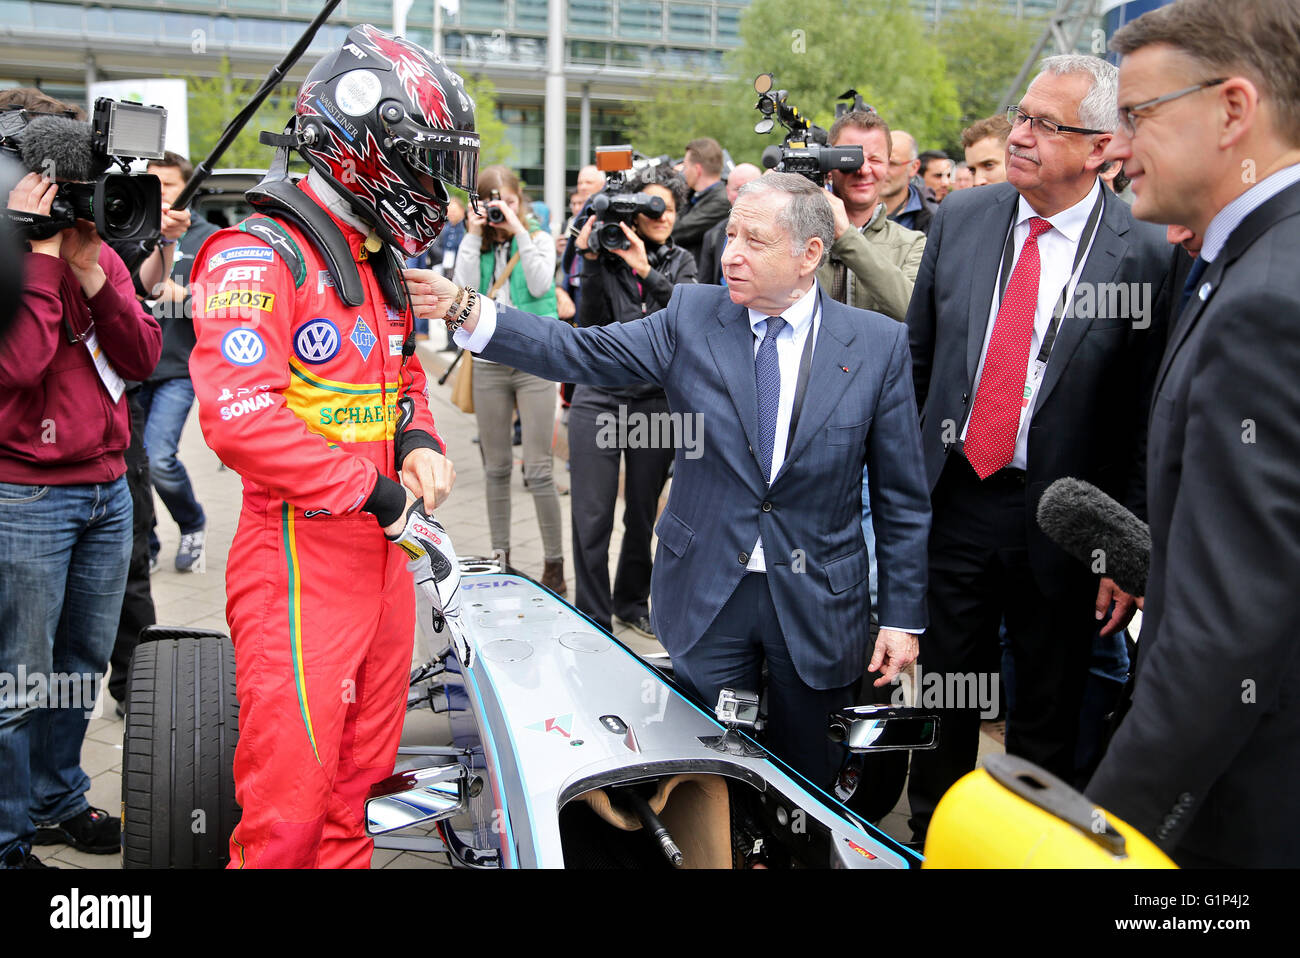 Leipzig, Germany. 18th May, 2016. Jean Todt (C-R), president of the International Automobile Federation (FIA), speaks to racing driver Daniel Abt (C-L) during the presentation of an electric Formula E racing car at the world summit of transport ministers in Leipzig, Germany, 18 May 2016. Some 1,000 participants from 60 countries are expected to attend the three-day summit held by the International Transport Forum of the Organisation for Economic Co-operation and Development (OECD). Photo: JAN WOITAS/dpa/Alamy Live News Stock Photo